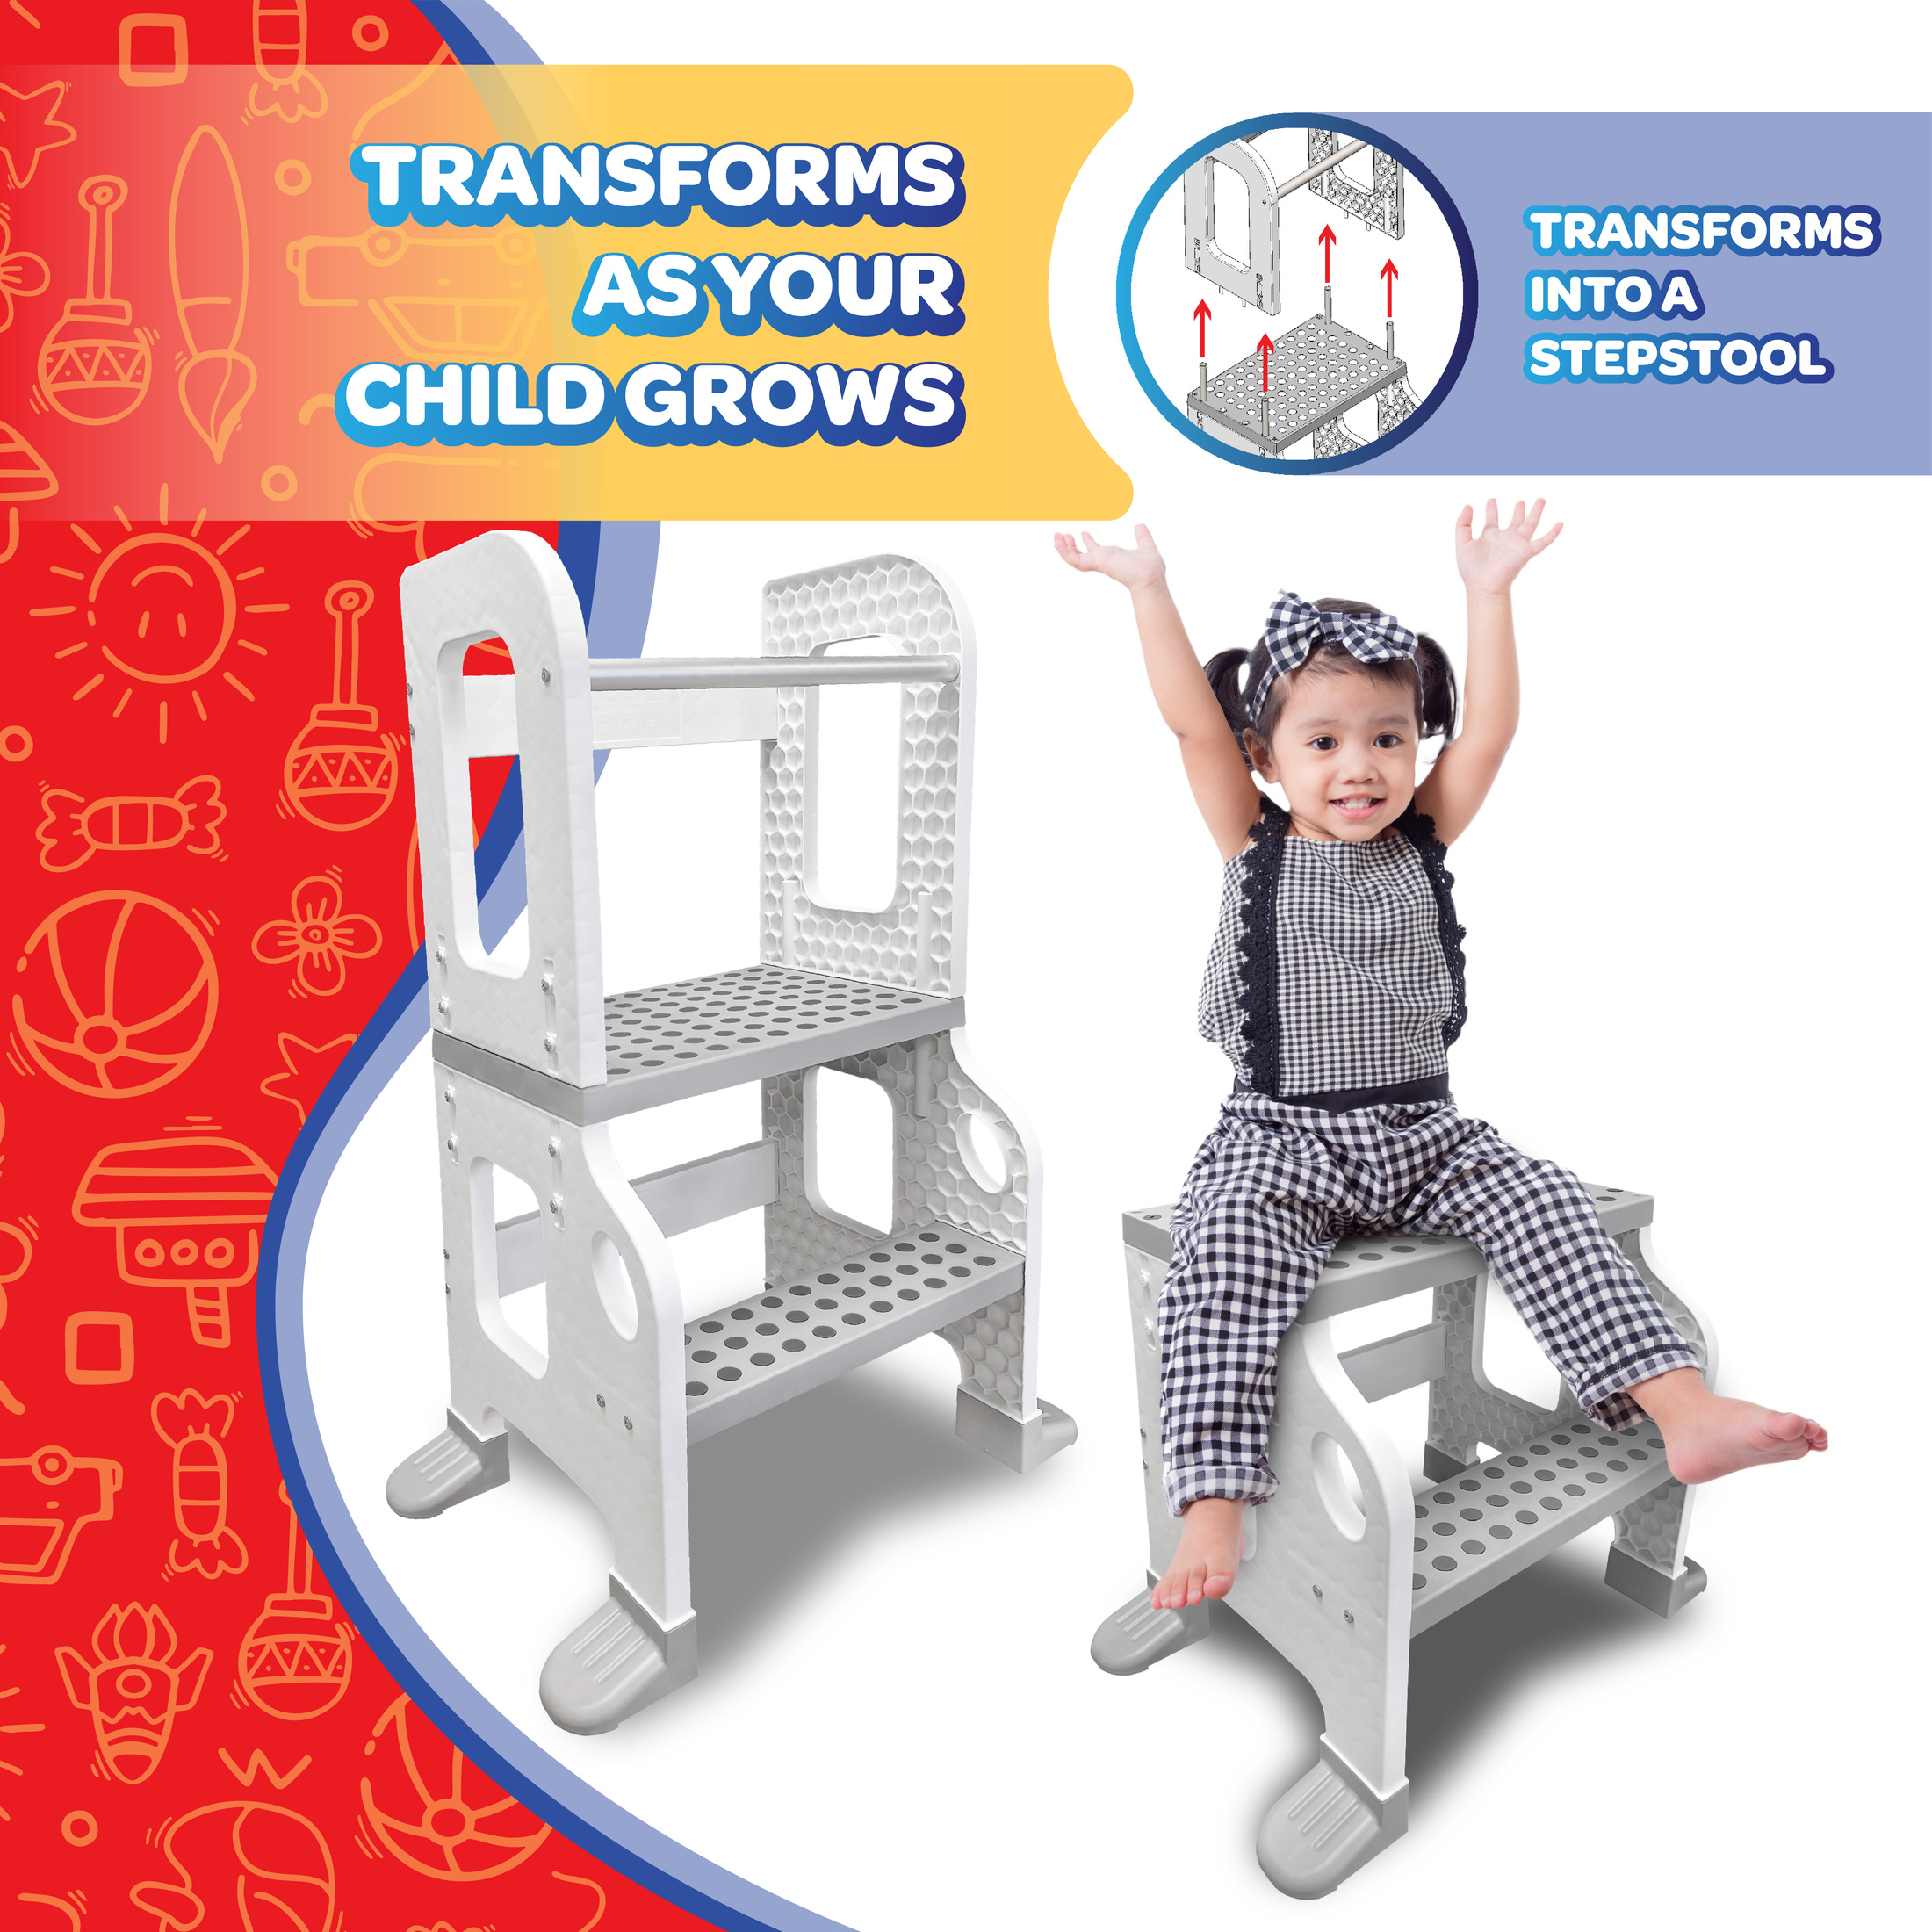 CORE PACIFIC Kitchen Buddy 2-in-1 Stool for Ages 1-3 safe up to 100 lbs. - image 2 of 7